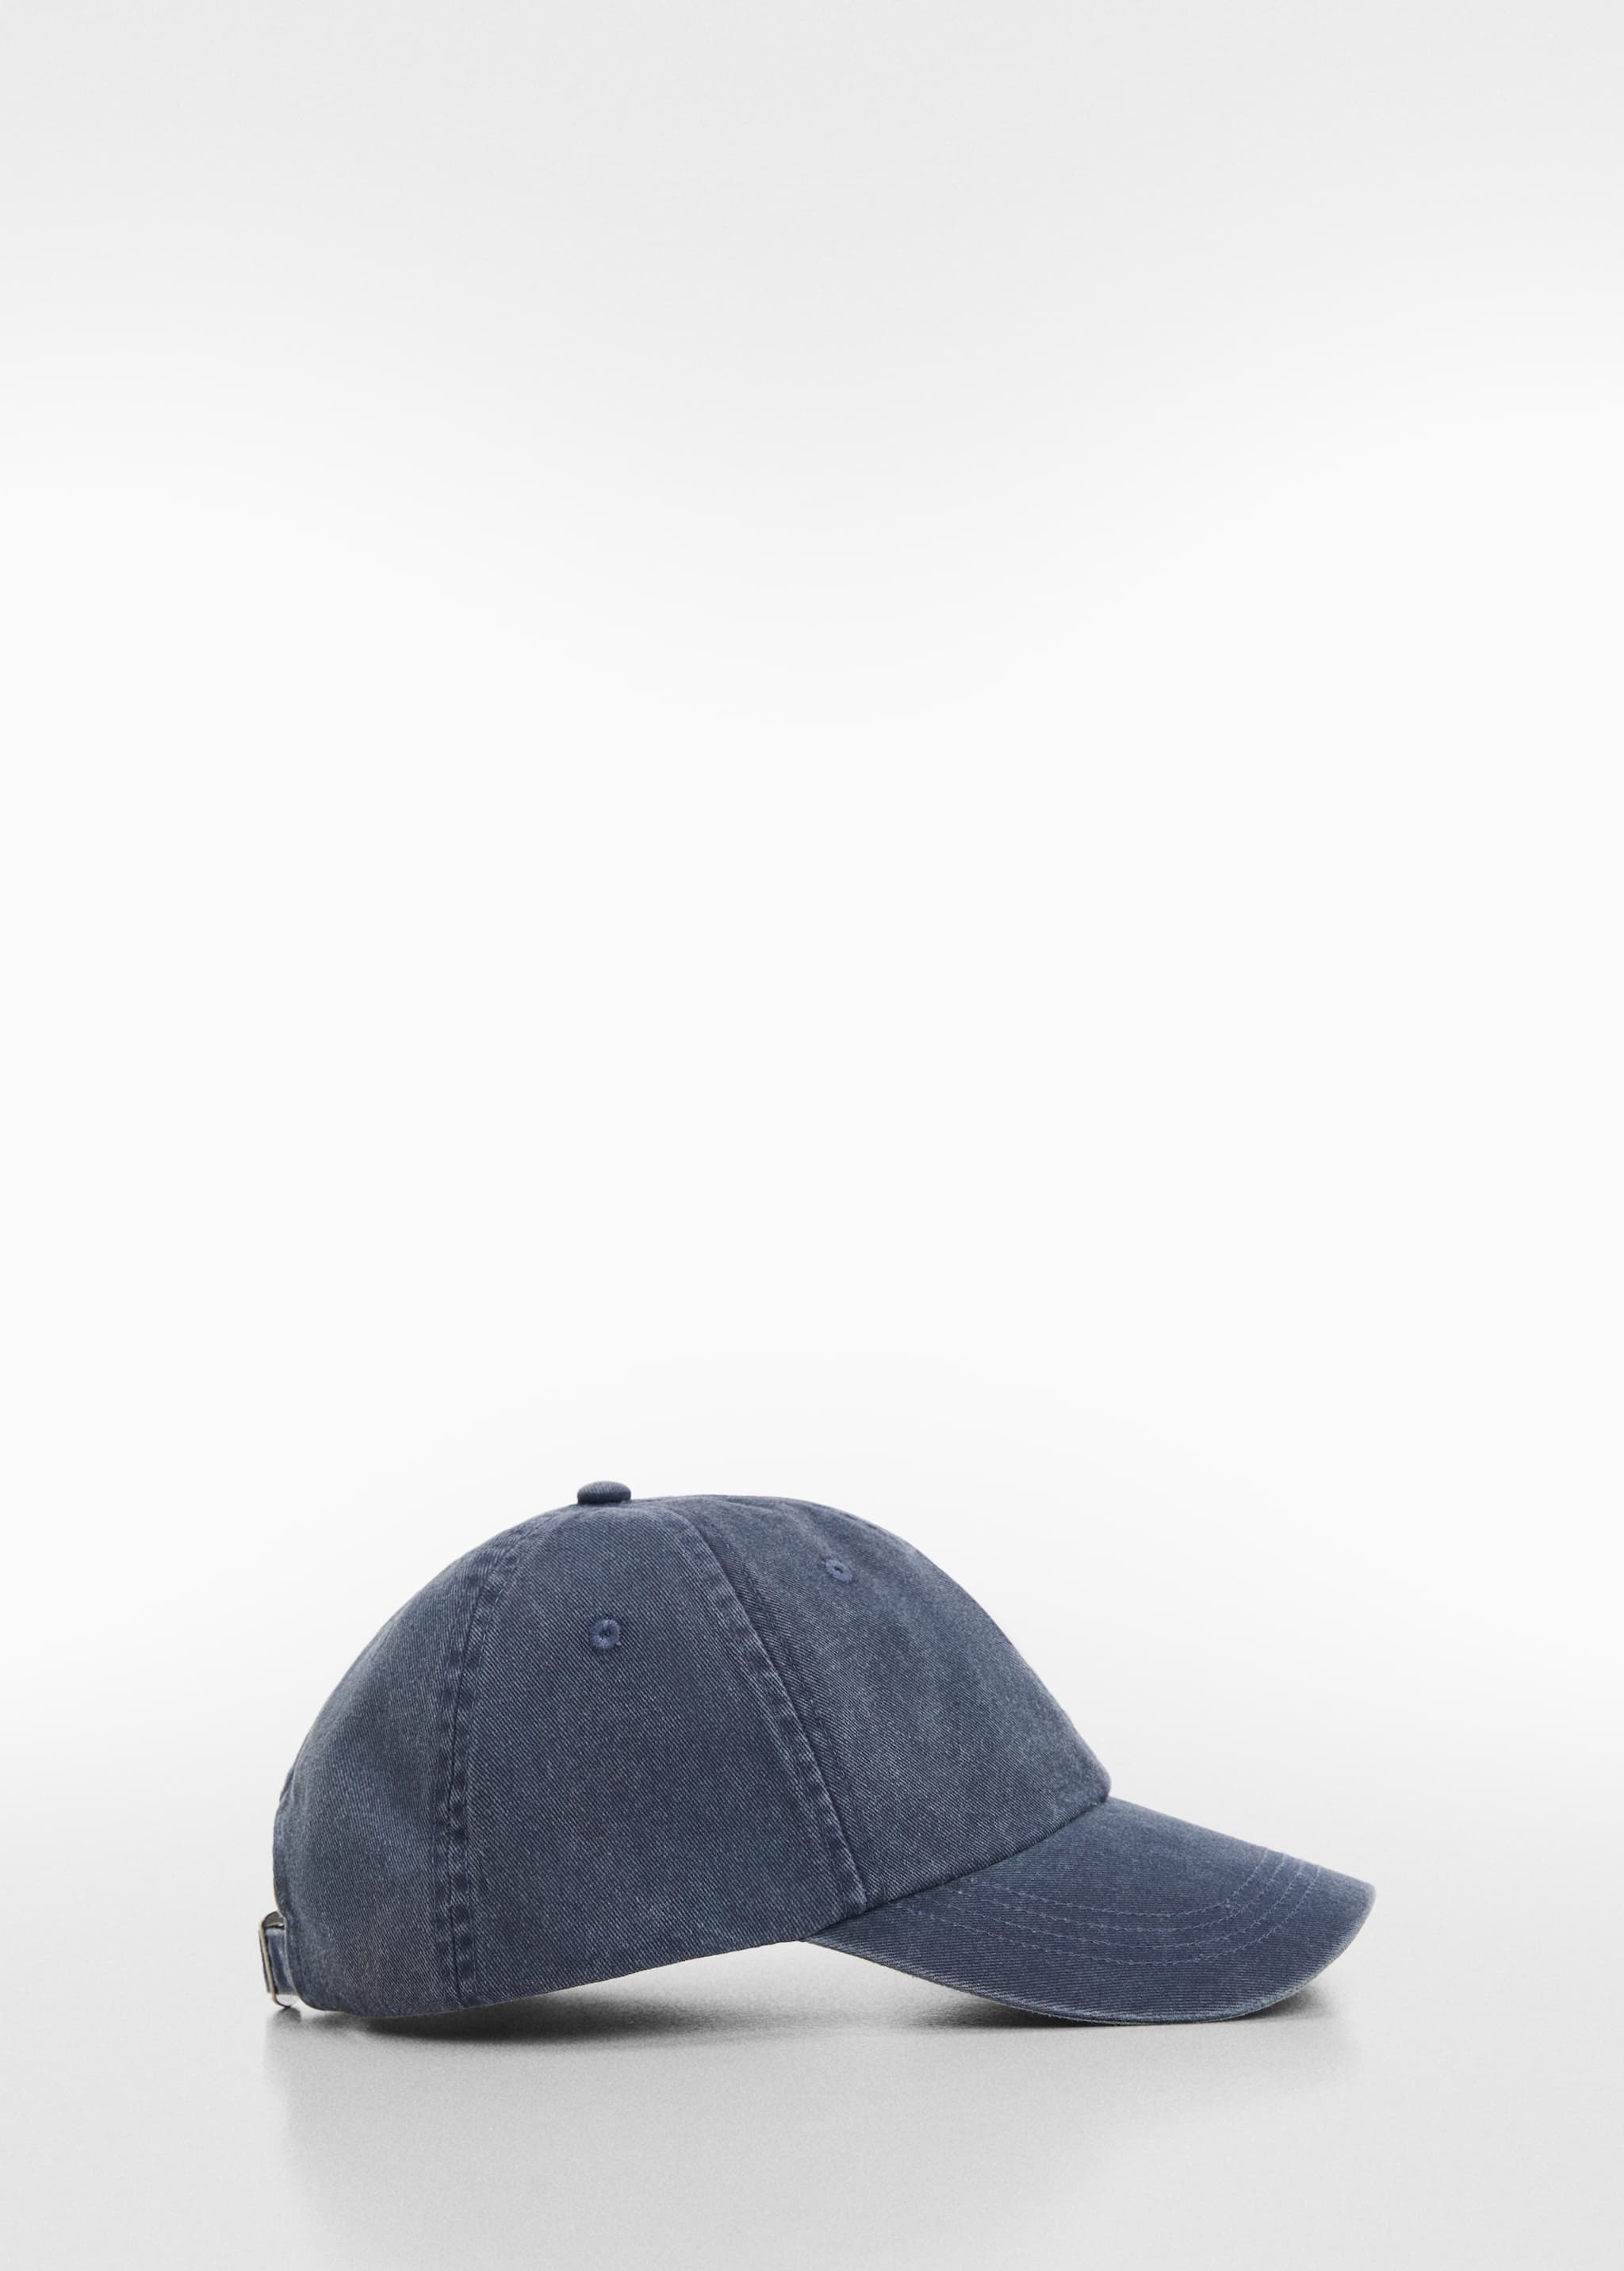 Adjustable basic cap - Article without model